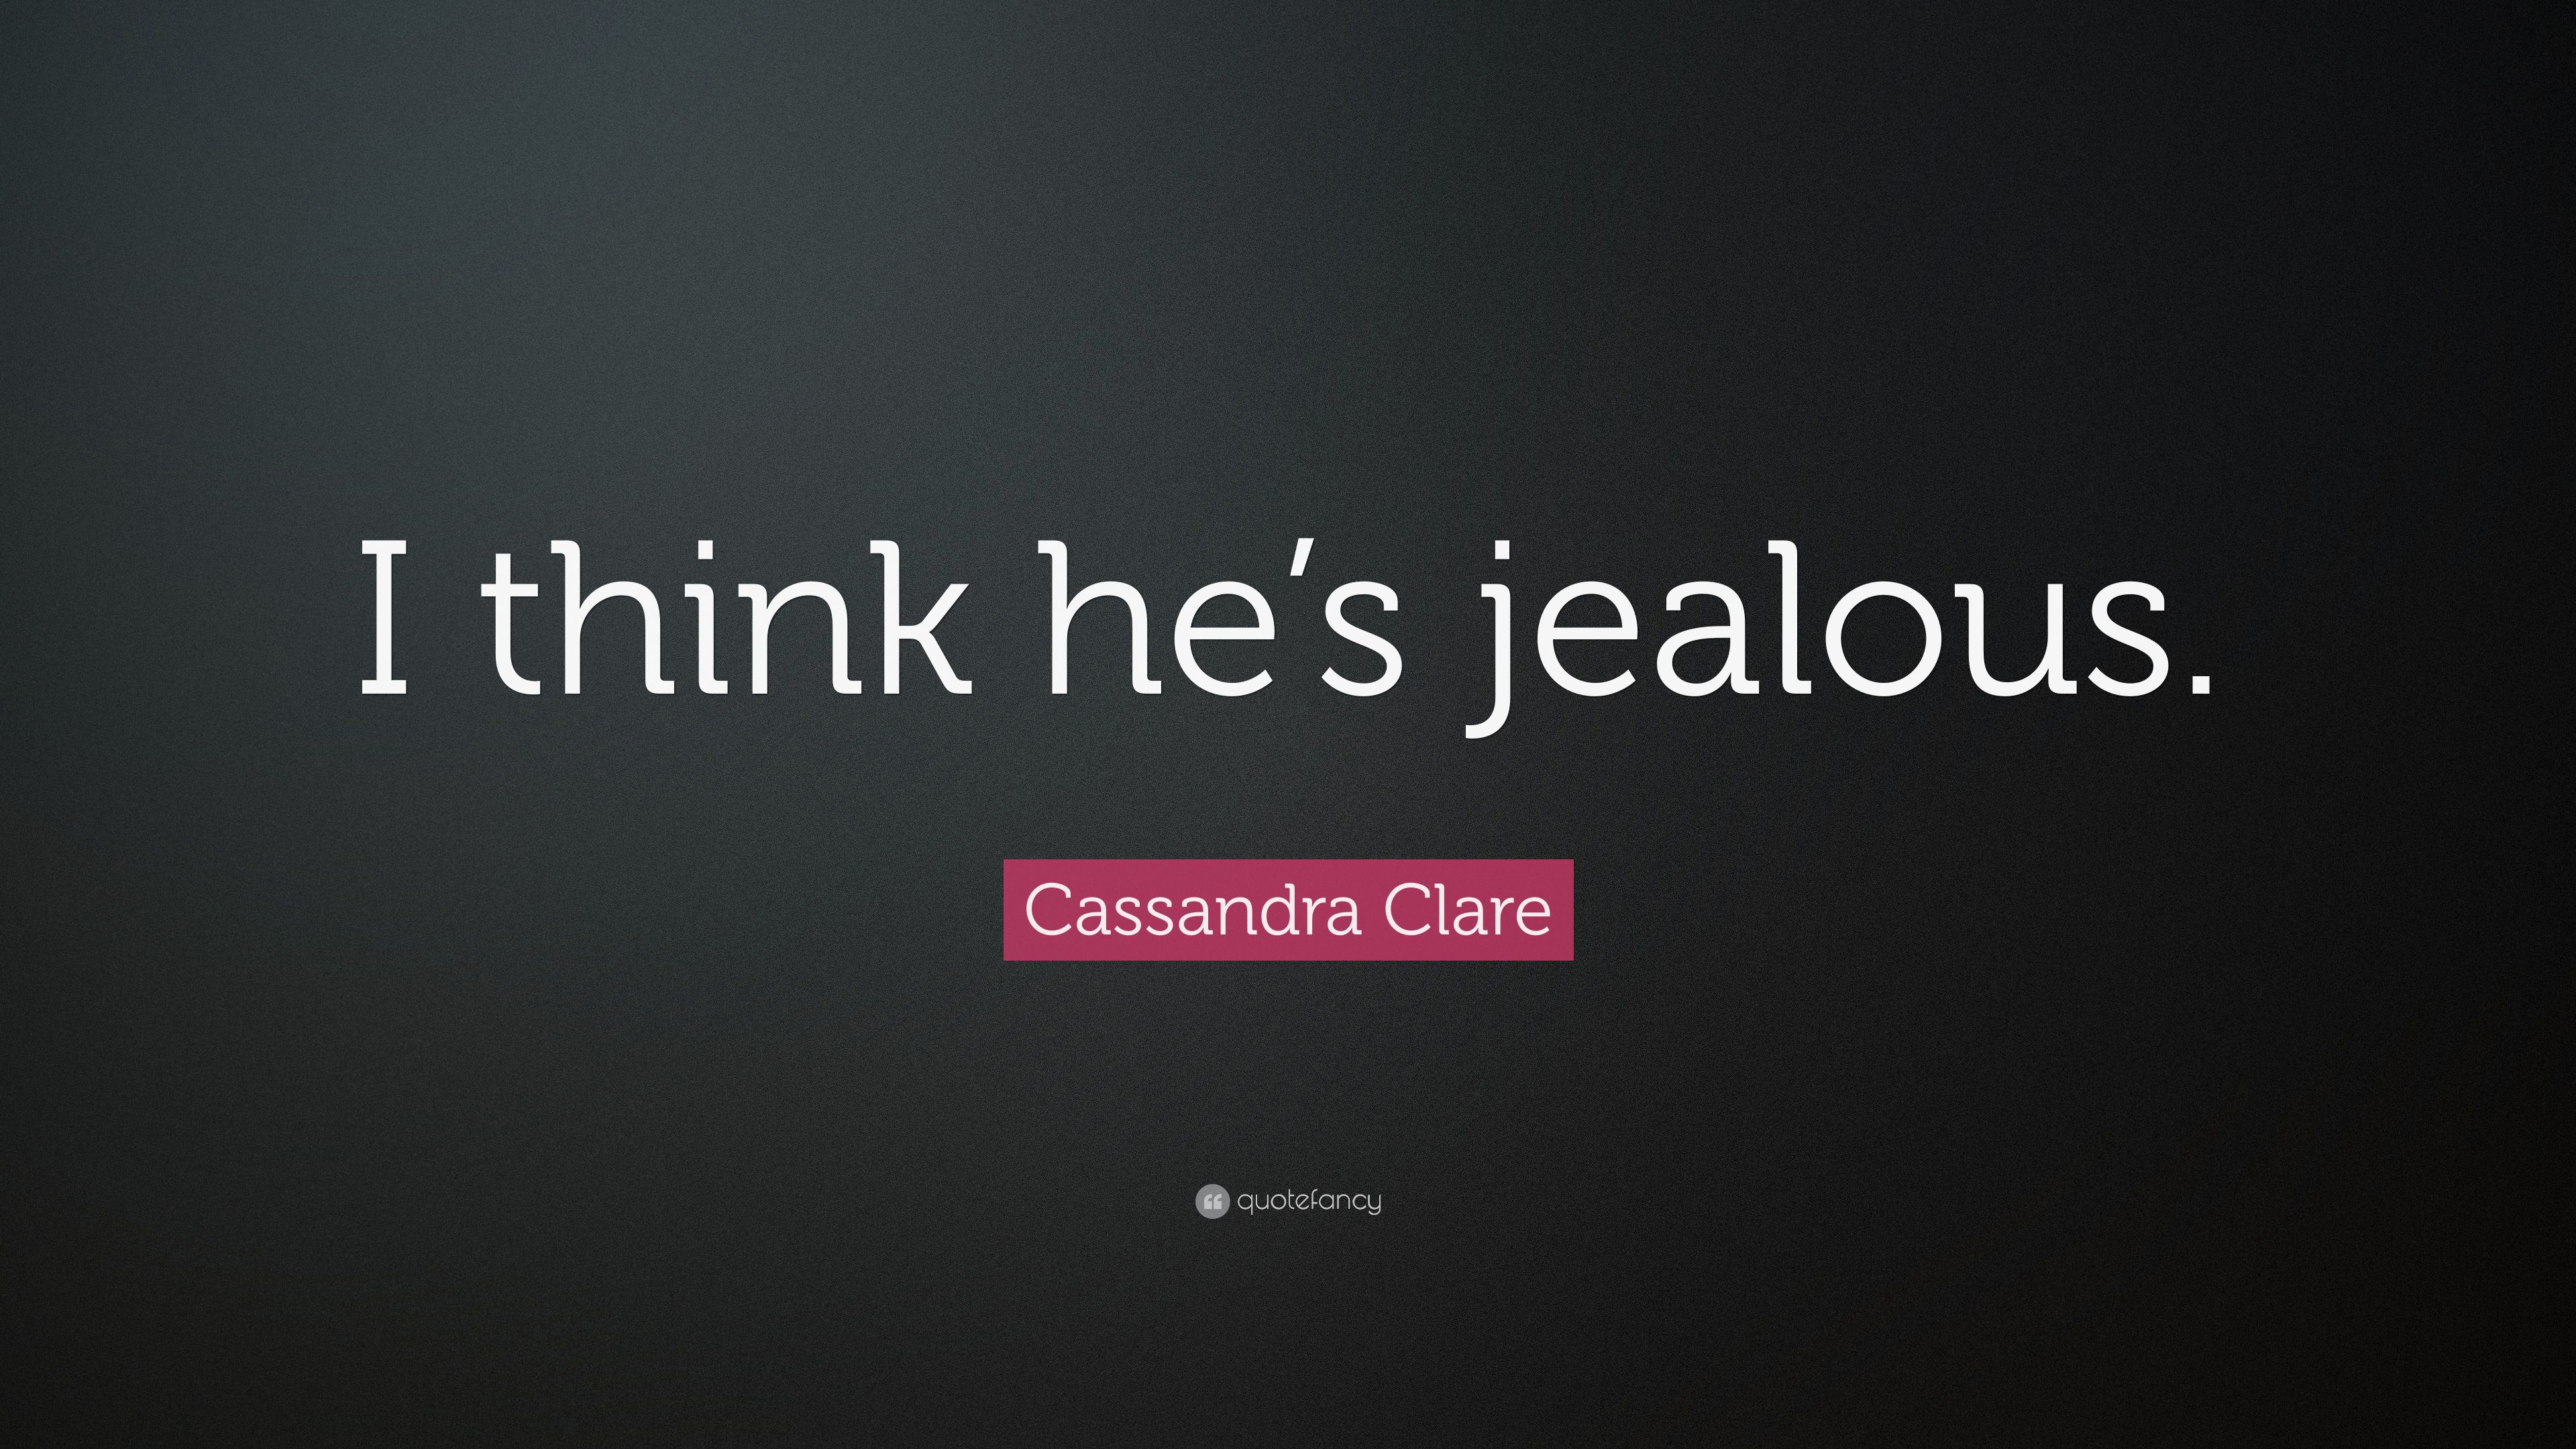 Cassandra Clare Quote: “I think he's jealous.” 6 wallpaper